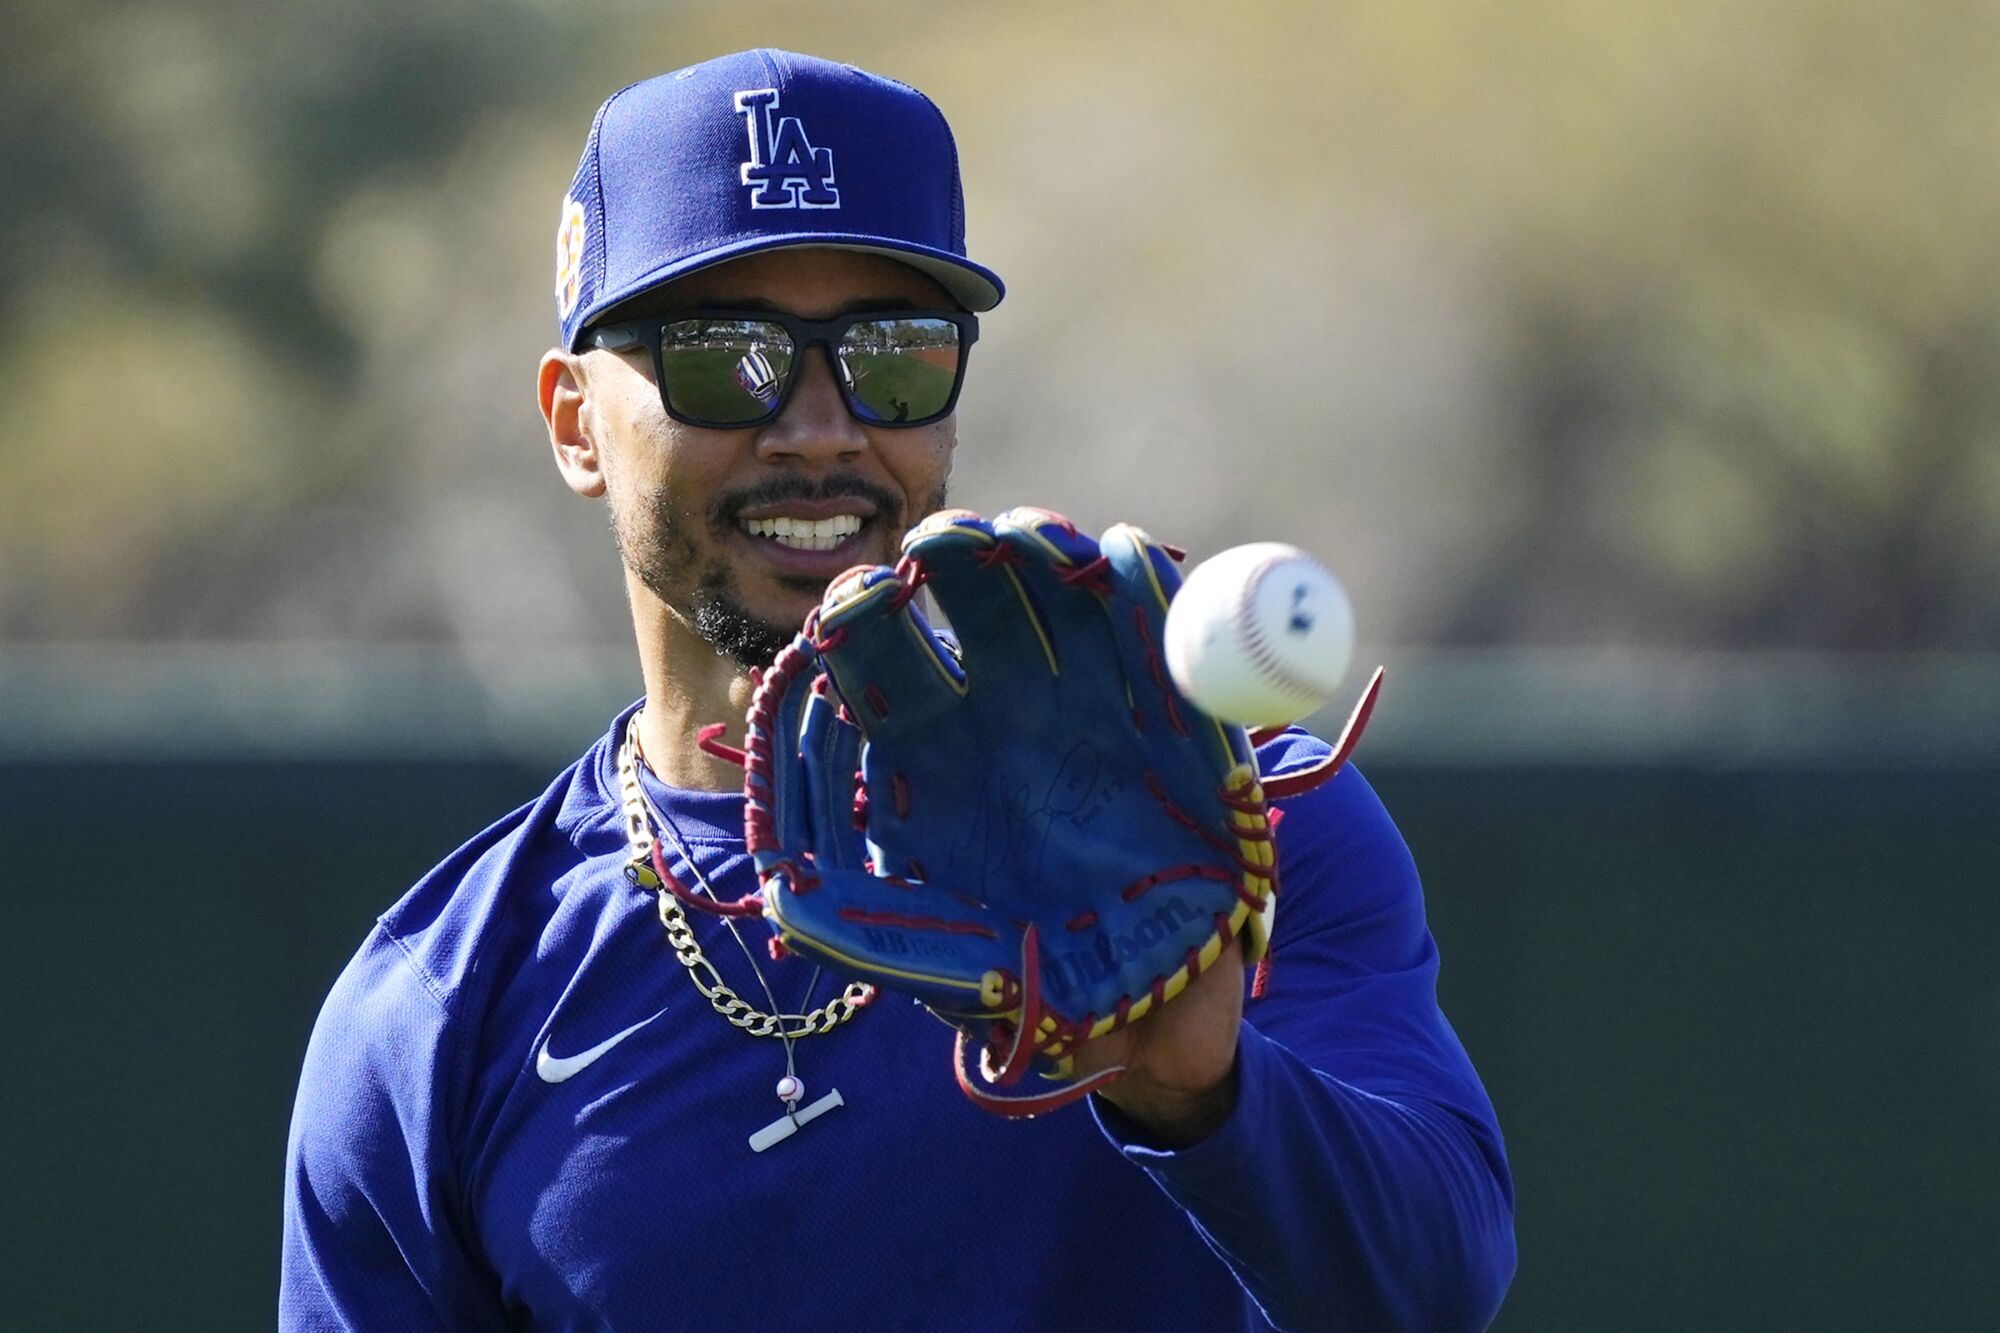 Los Angeles Dodgers' Mookie Betts reaches to catch a baseball while warming up.